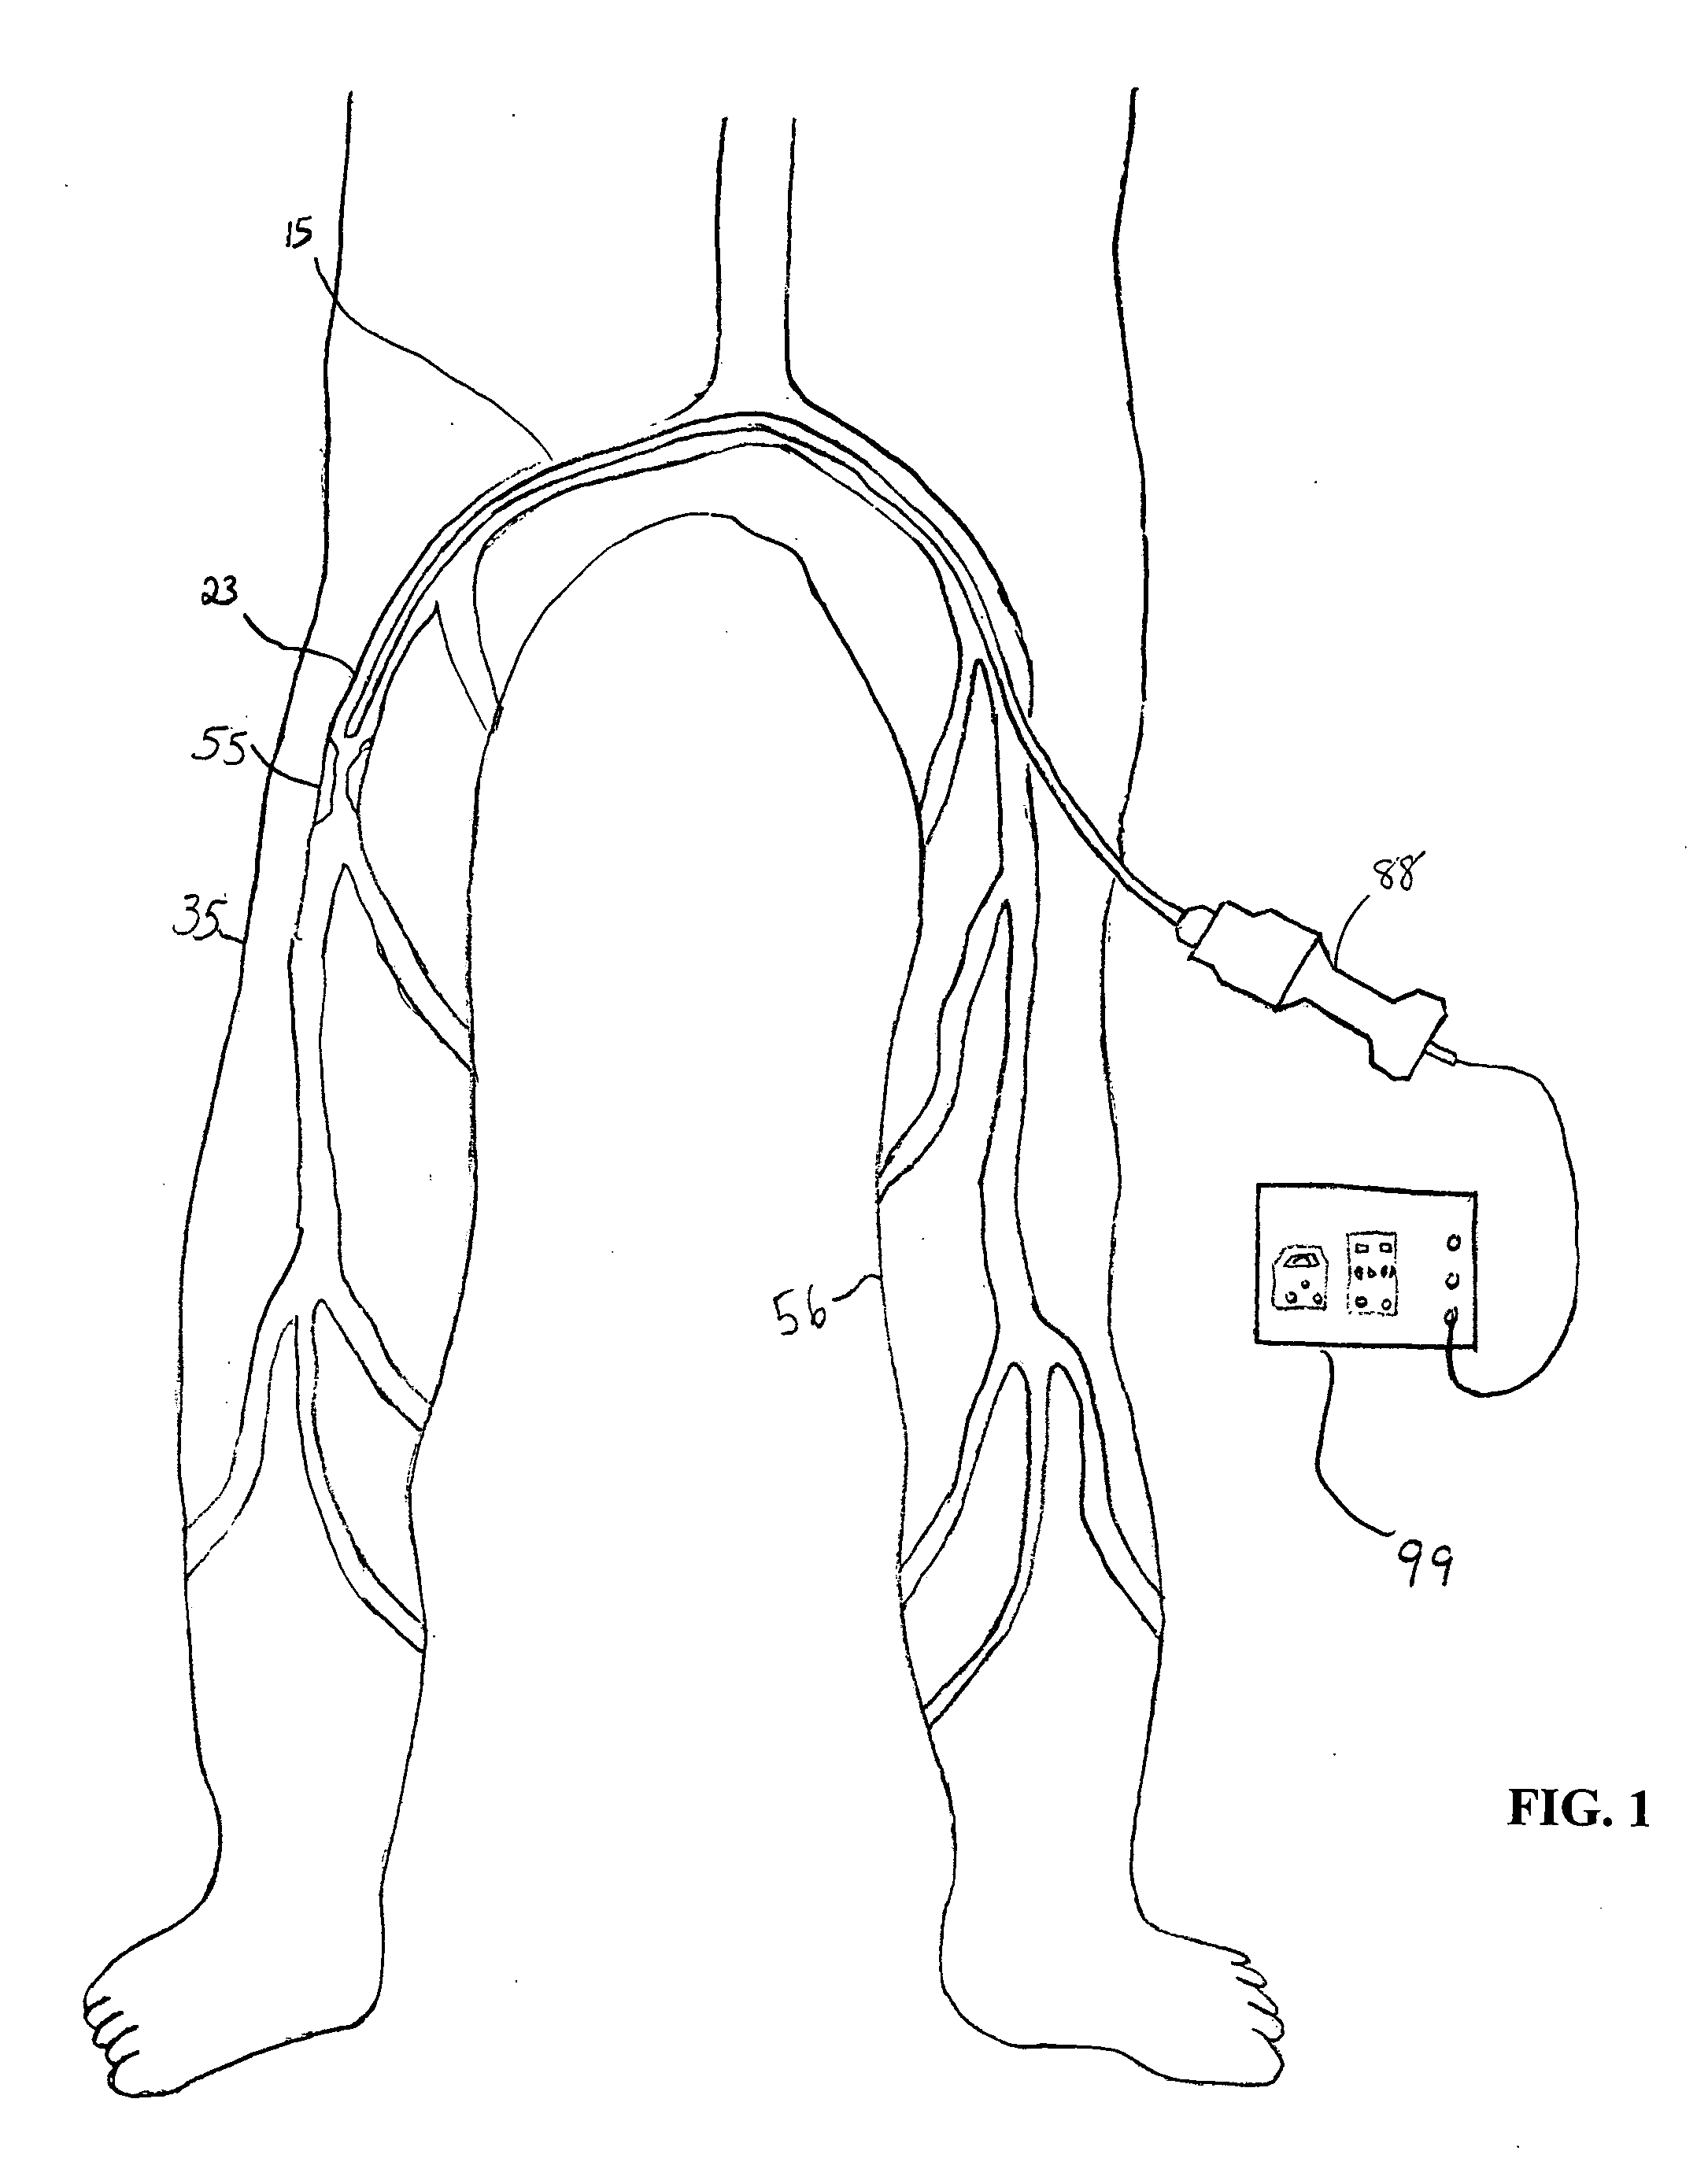 Apparatus and method for an ultrasonic medical device to treat peripheral artery disease